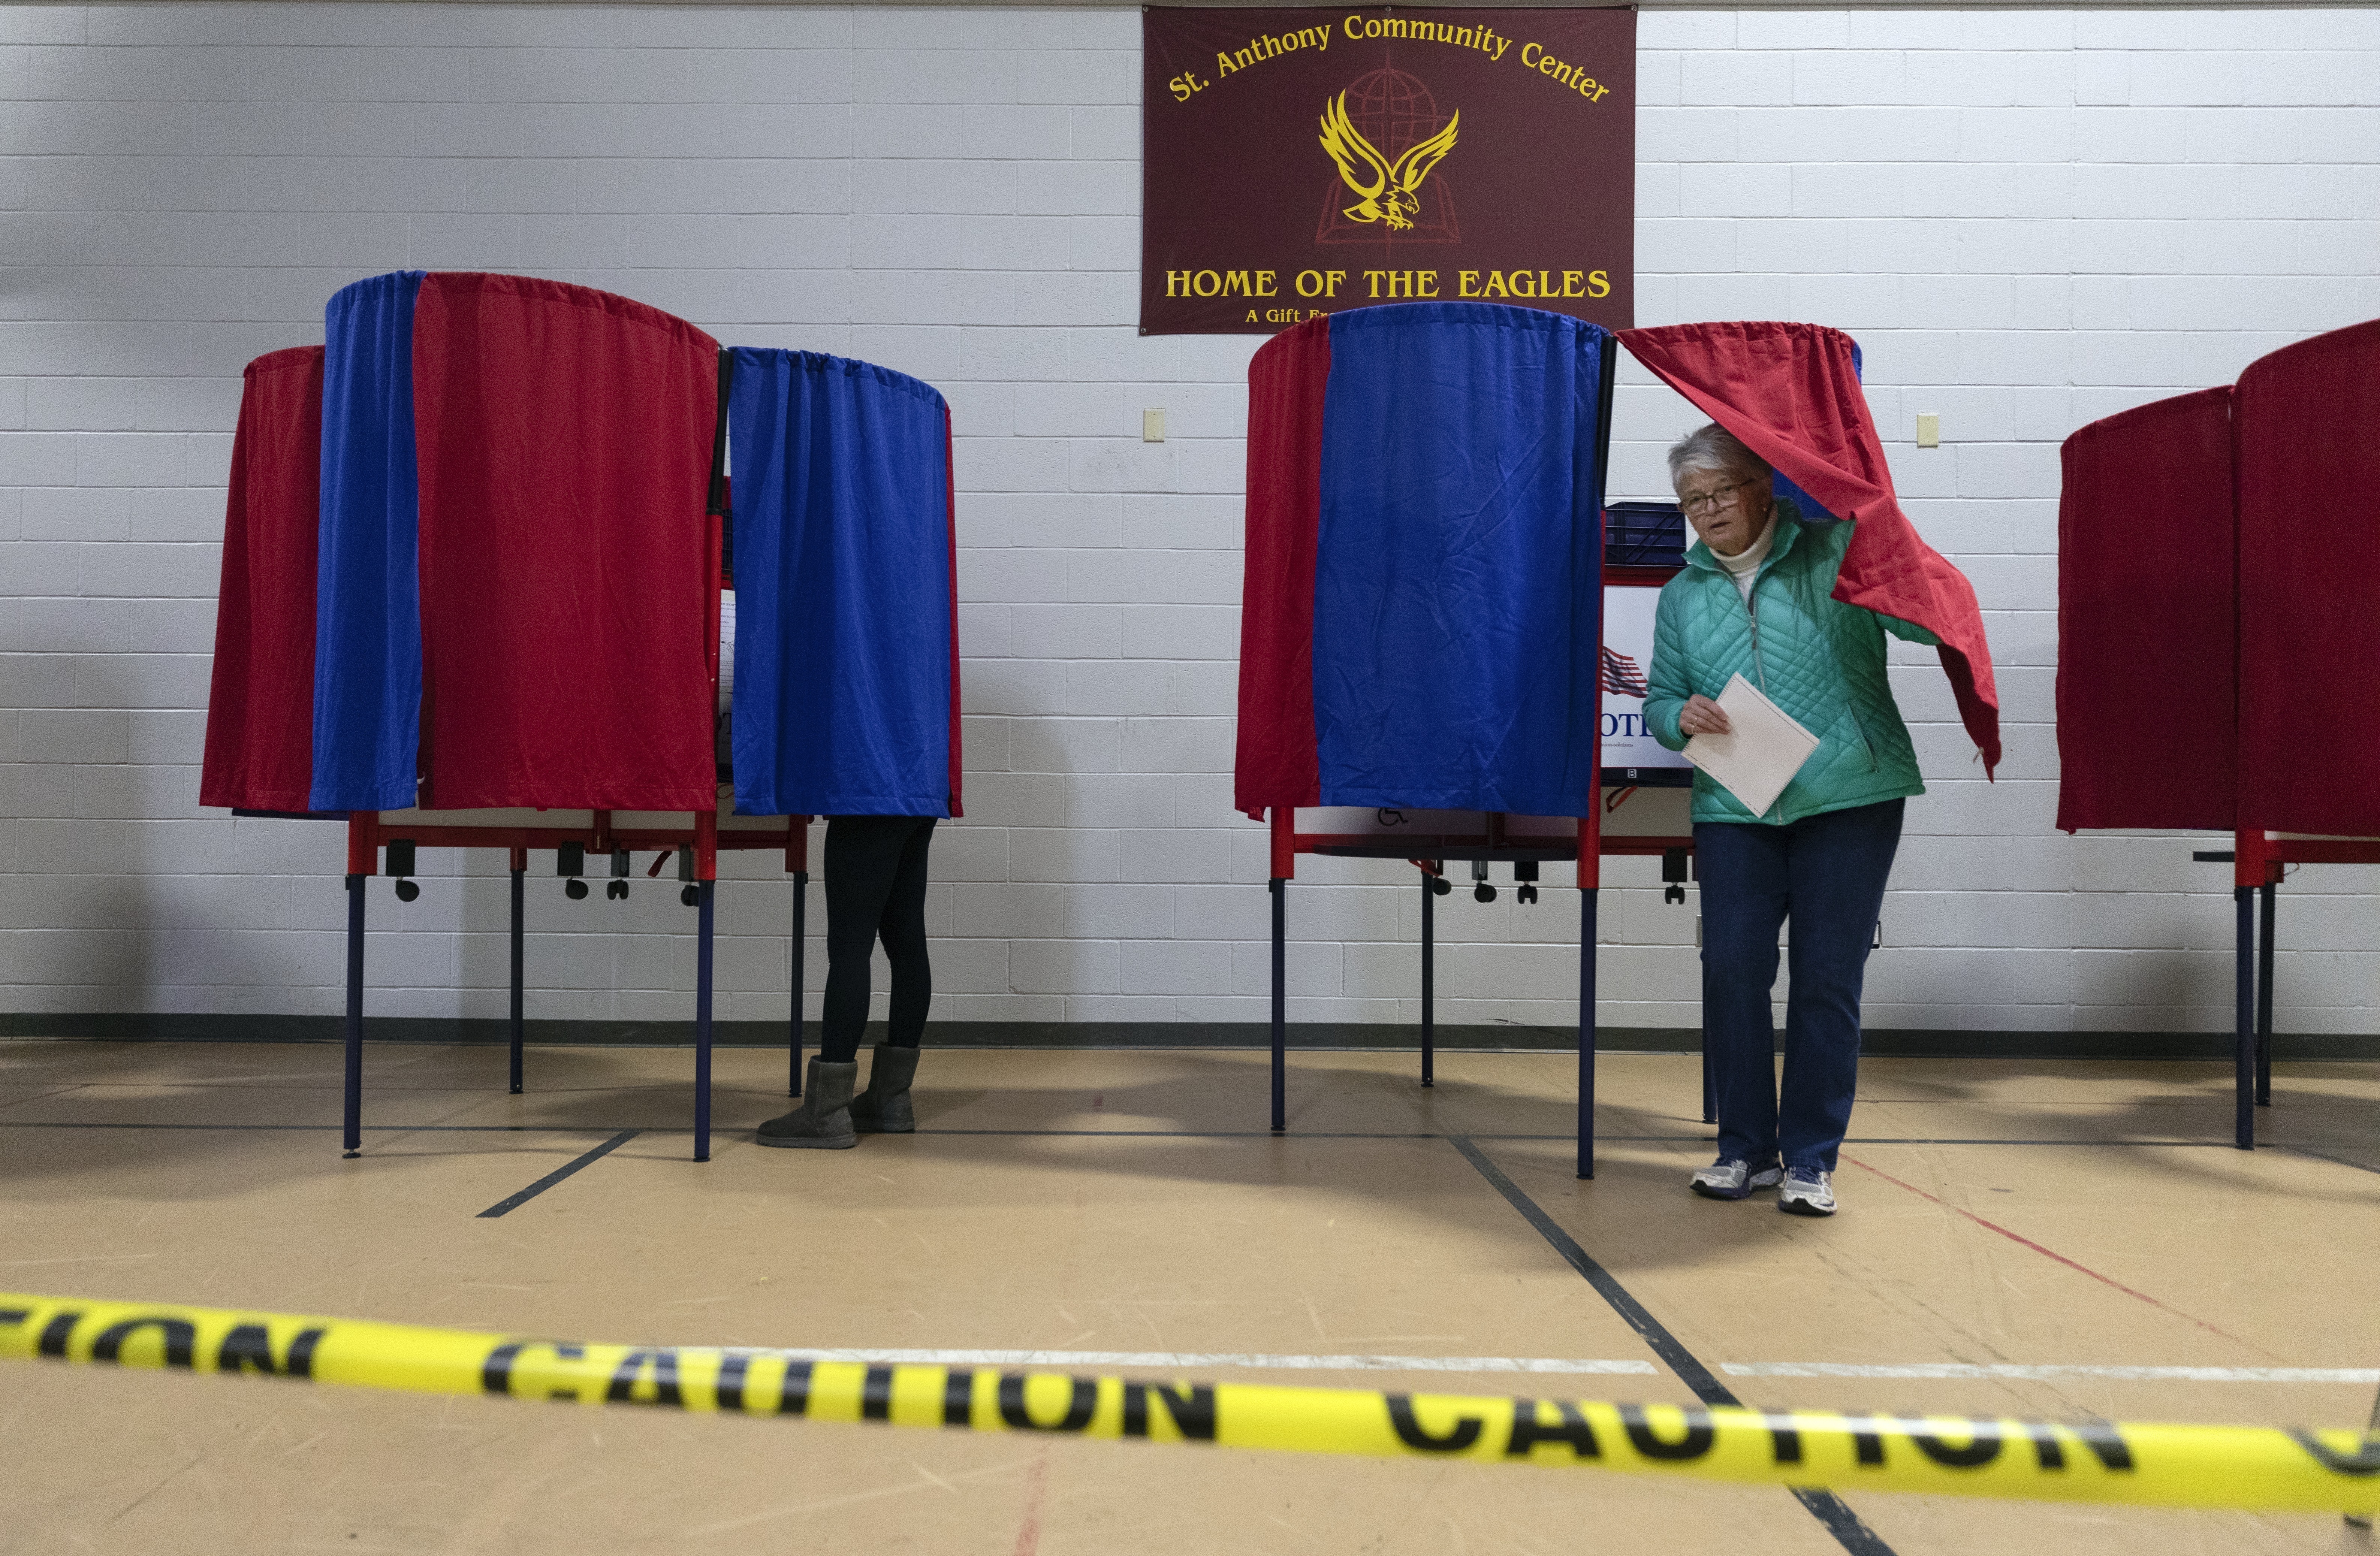 A voter leaves a polling booth at St. Anthony Community Center in Manchester, N.H., during the state